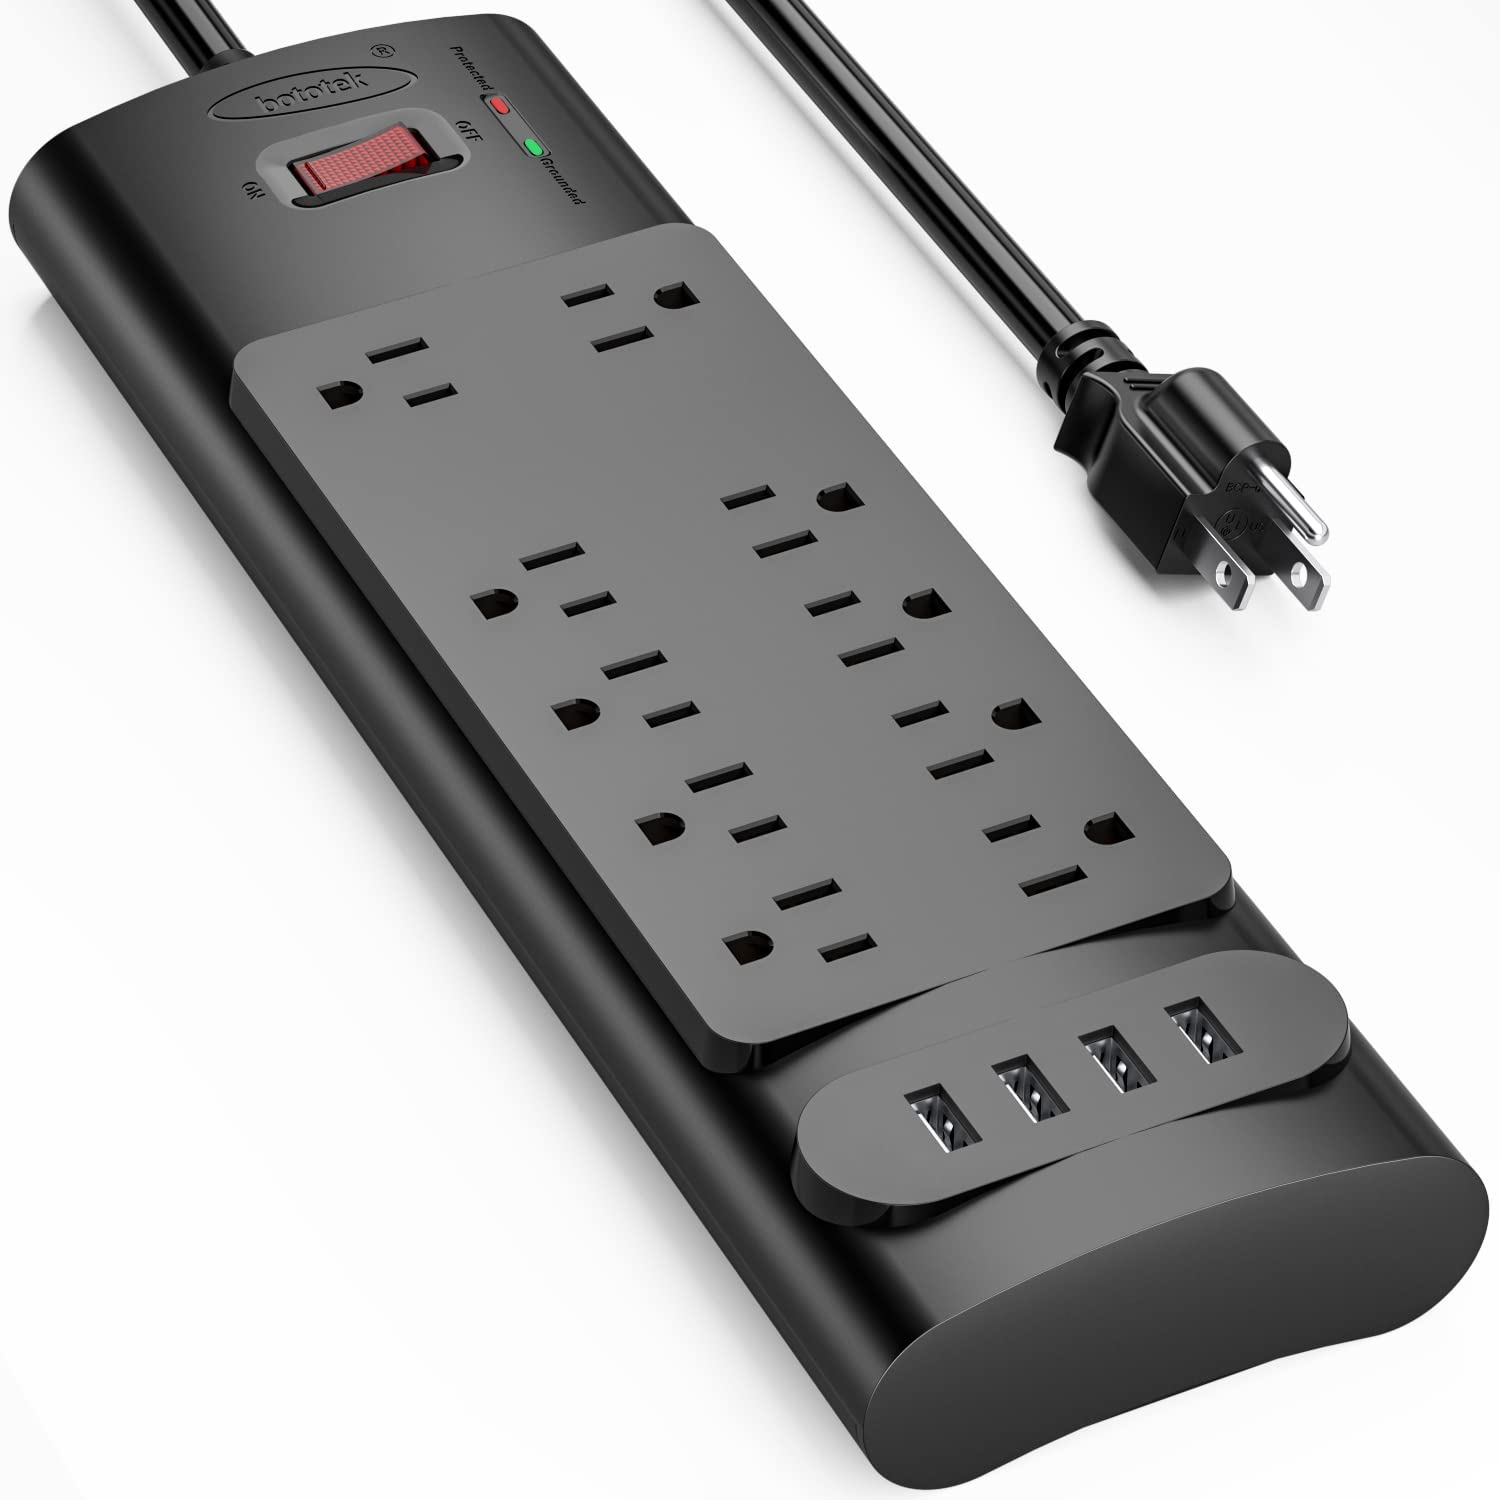 47490 - Bototek Surge Protector Power Strip with 10 AC Outlets and 4 USB Ports USA